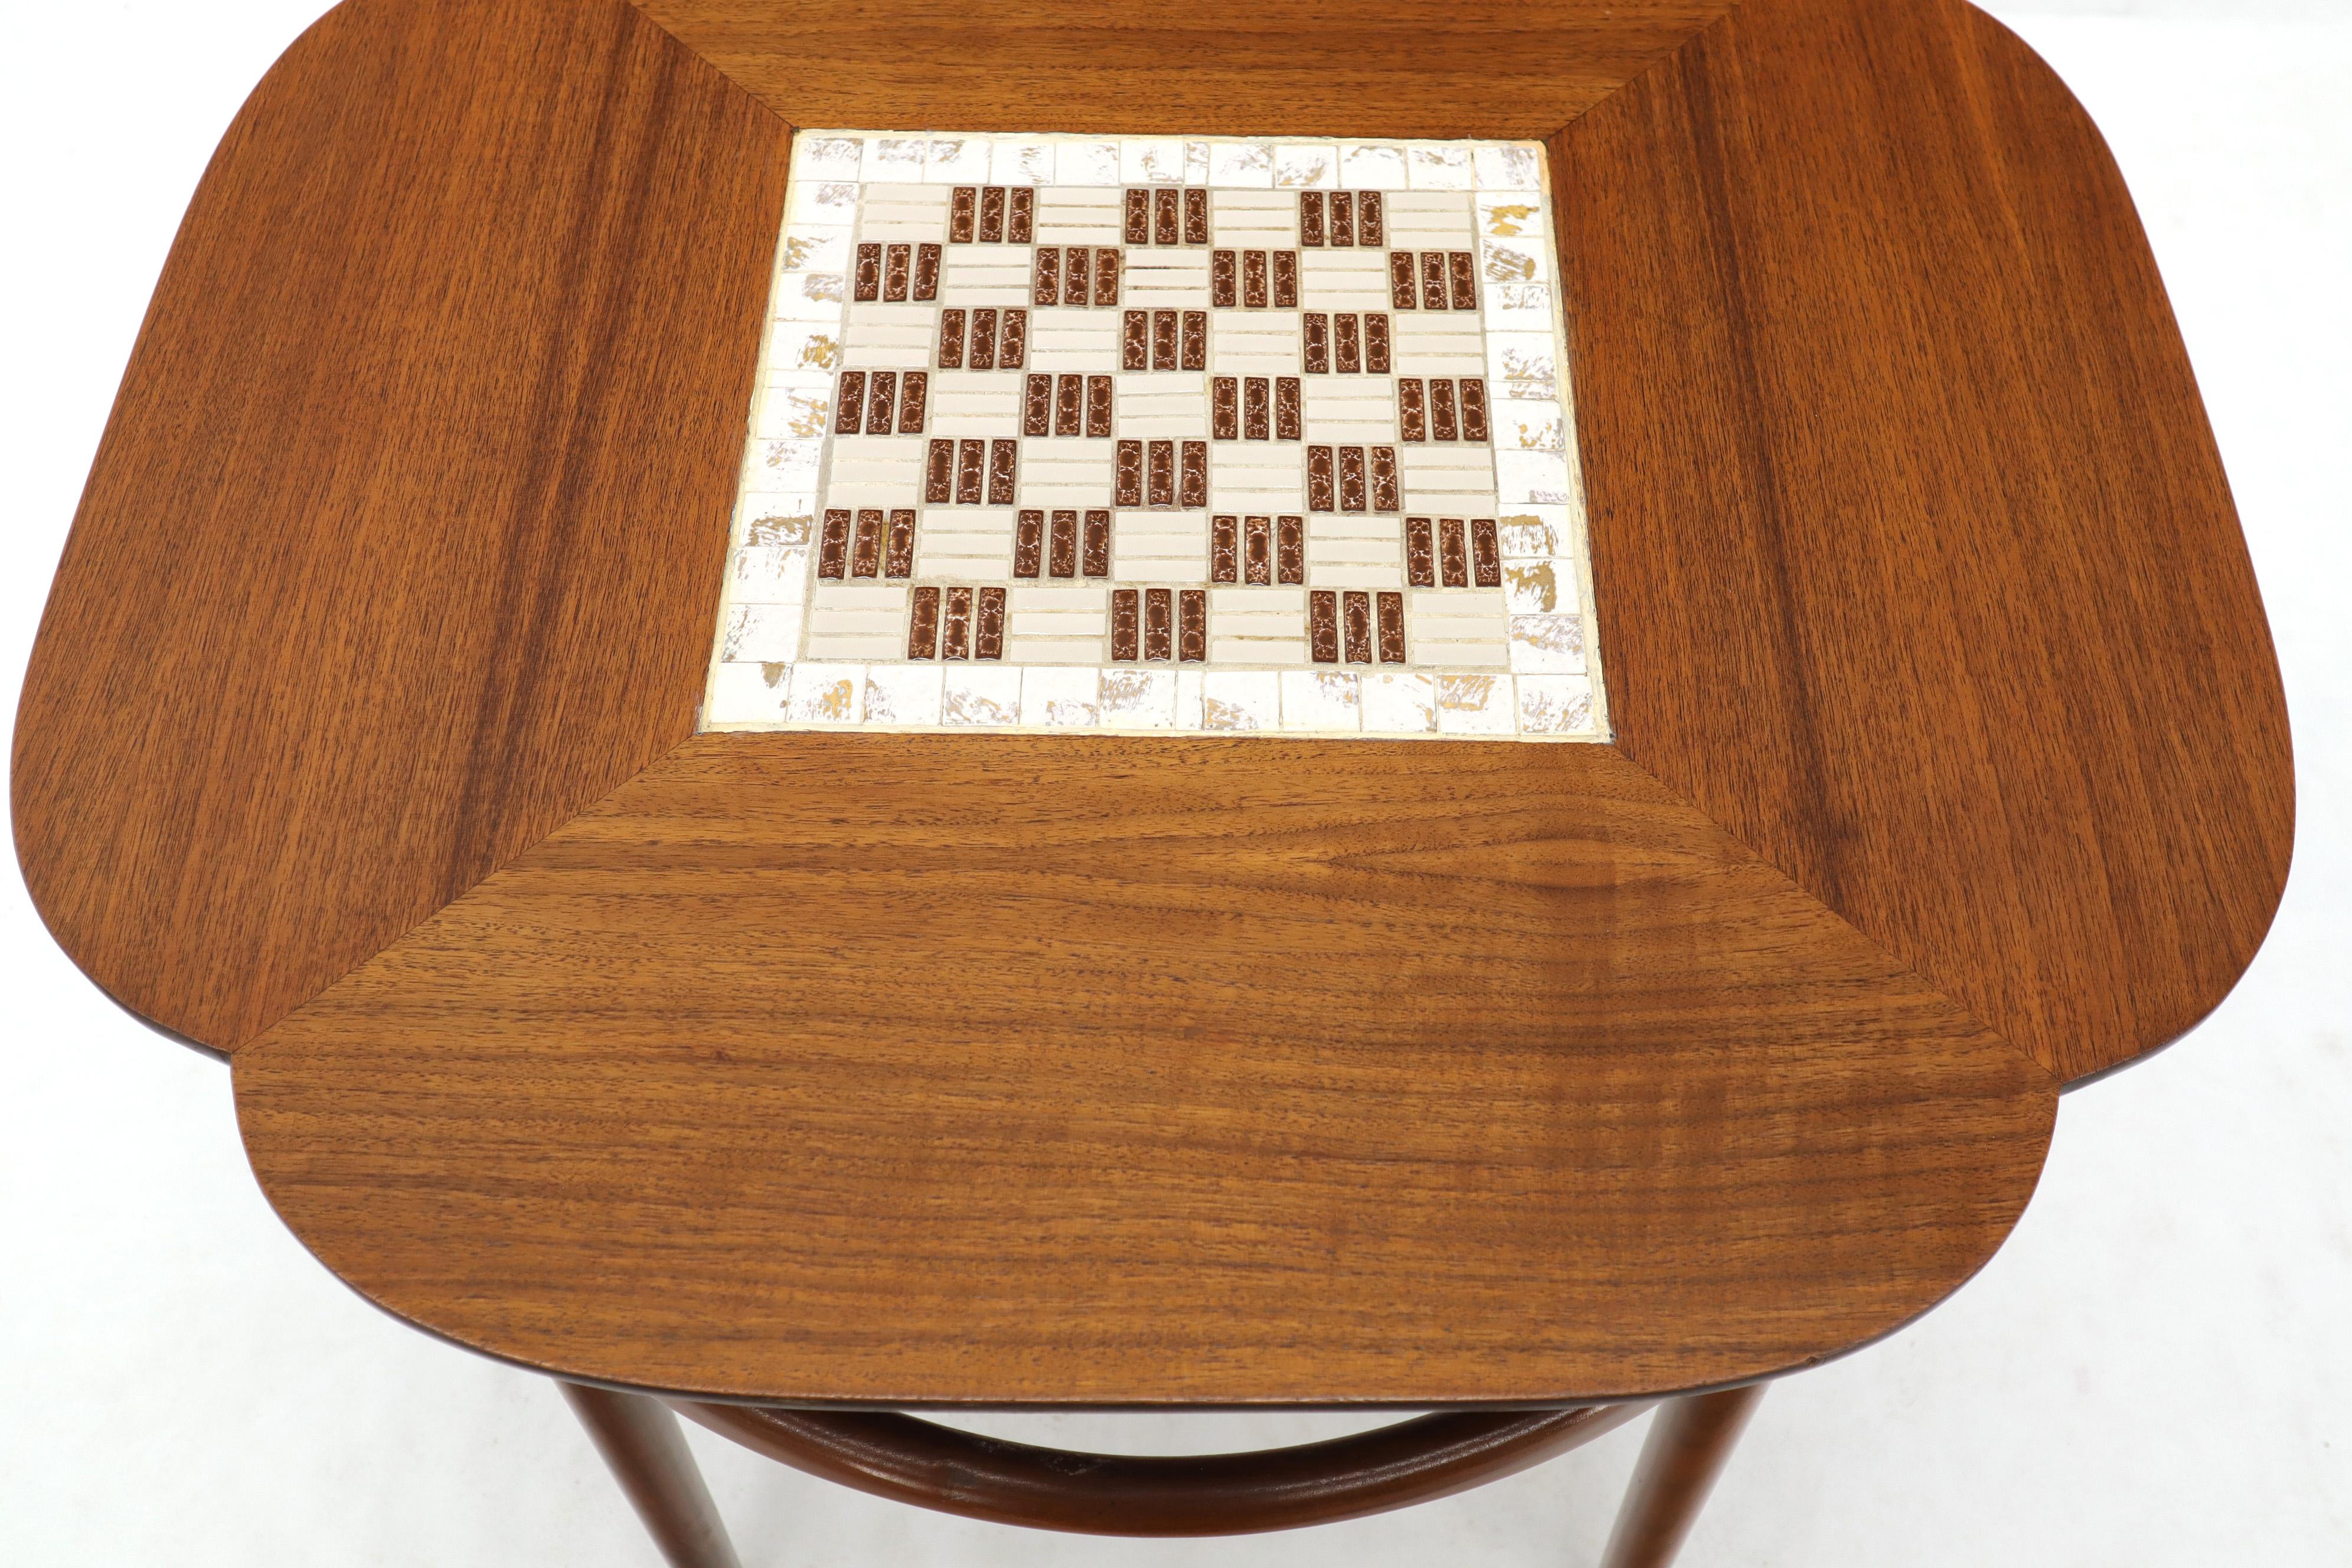 Clover Shape Checker Tile Top Walnut Side Table In Excellent Condition For Sale In Rockaway, NJ